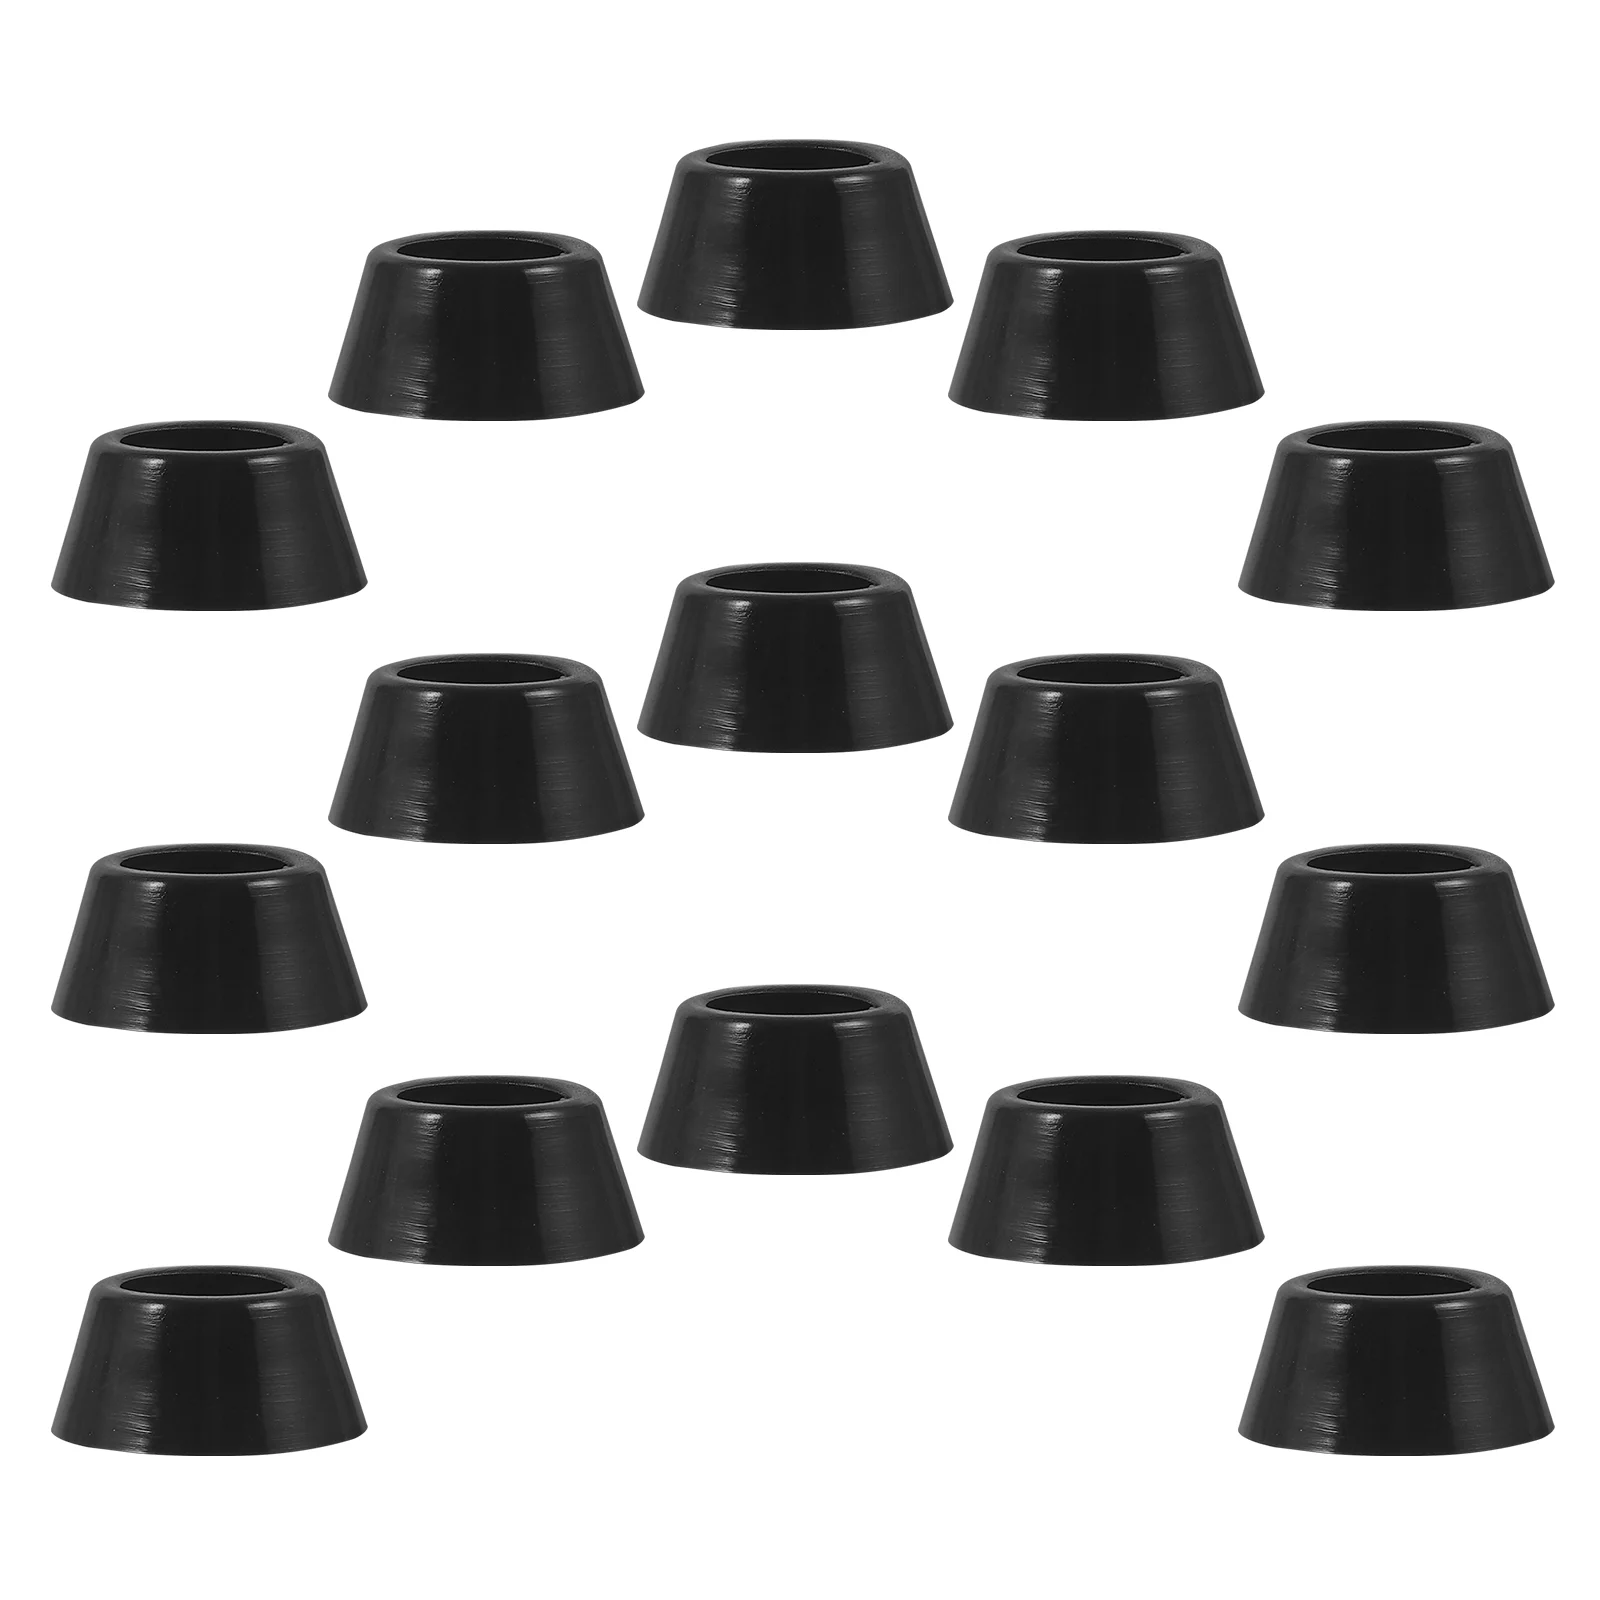 

20 Pcs Moisture-proof Rubber Feet Furniture Leveler Leveling Shims Wheels for Office Chair Table Leg Levelers Extra Large